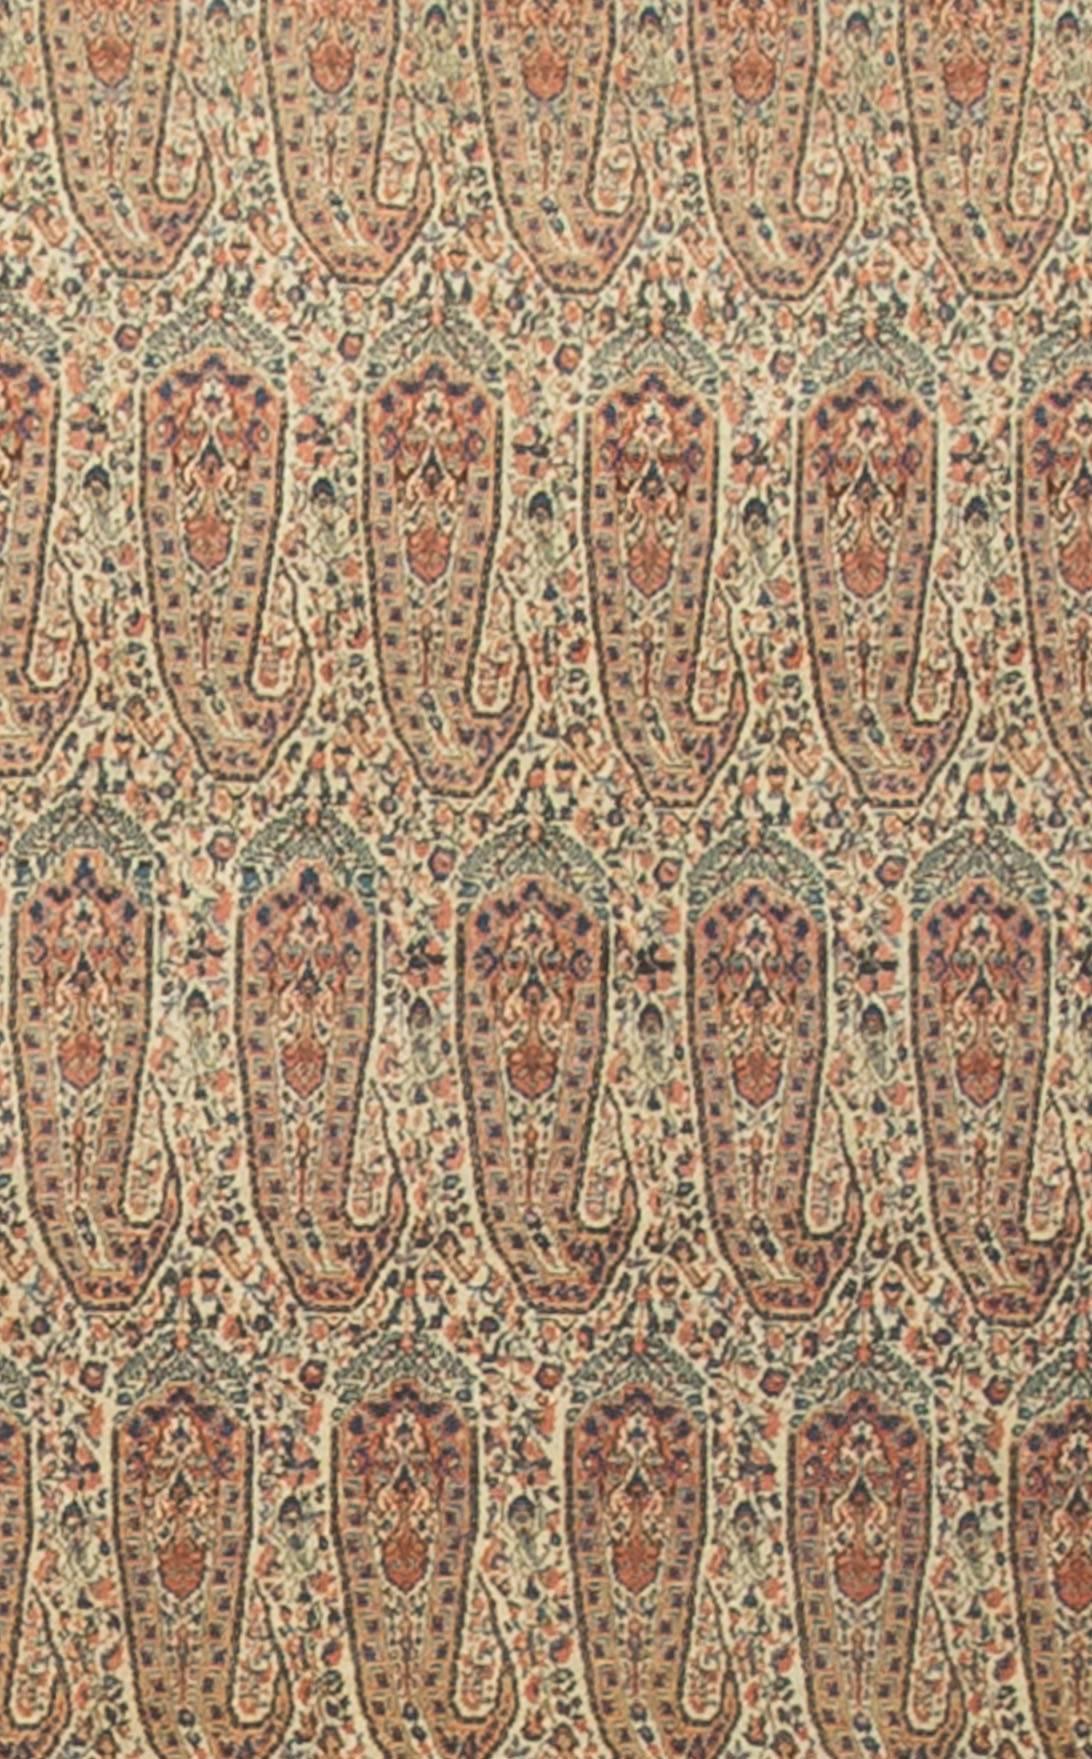 Antique Persian Senneh Rug circa 1880. From the town of Senha (Sanandaj) in Kurdistan come antique rugs that attain nearly miraculous fineness and suppleness and they are rugs, almost never room sizes or runners the texture is unique: a sandpapery